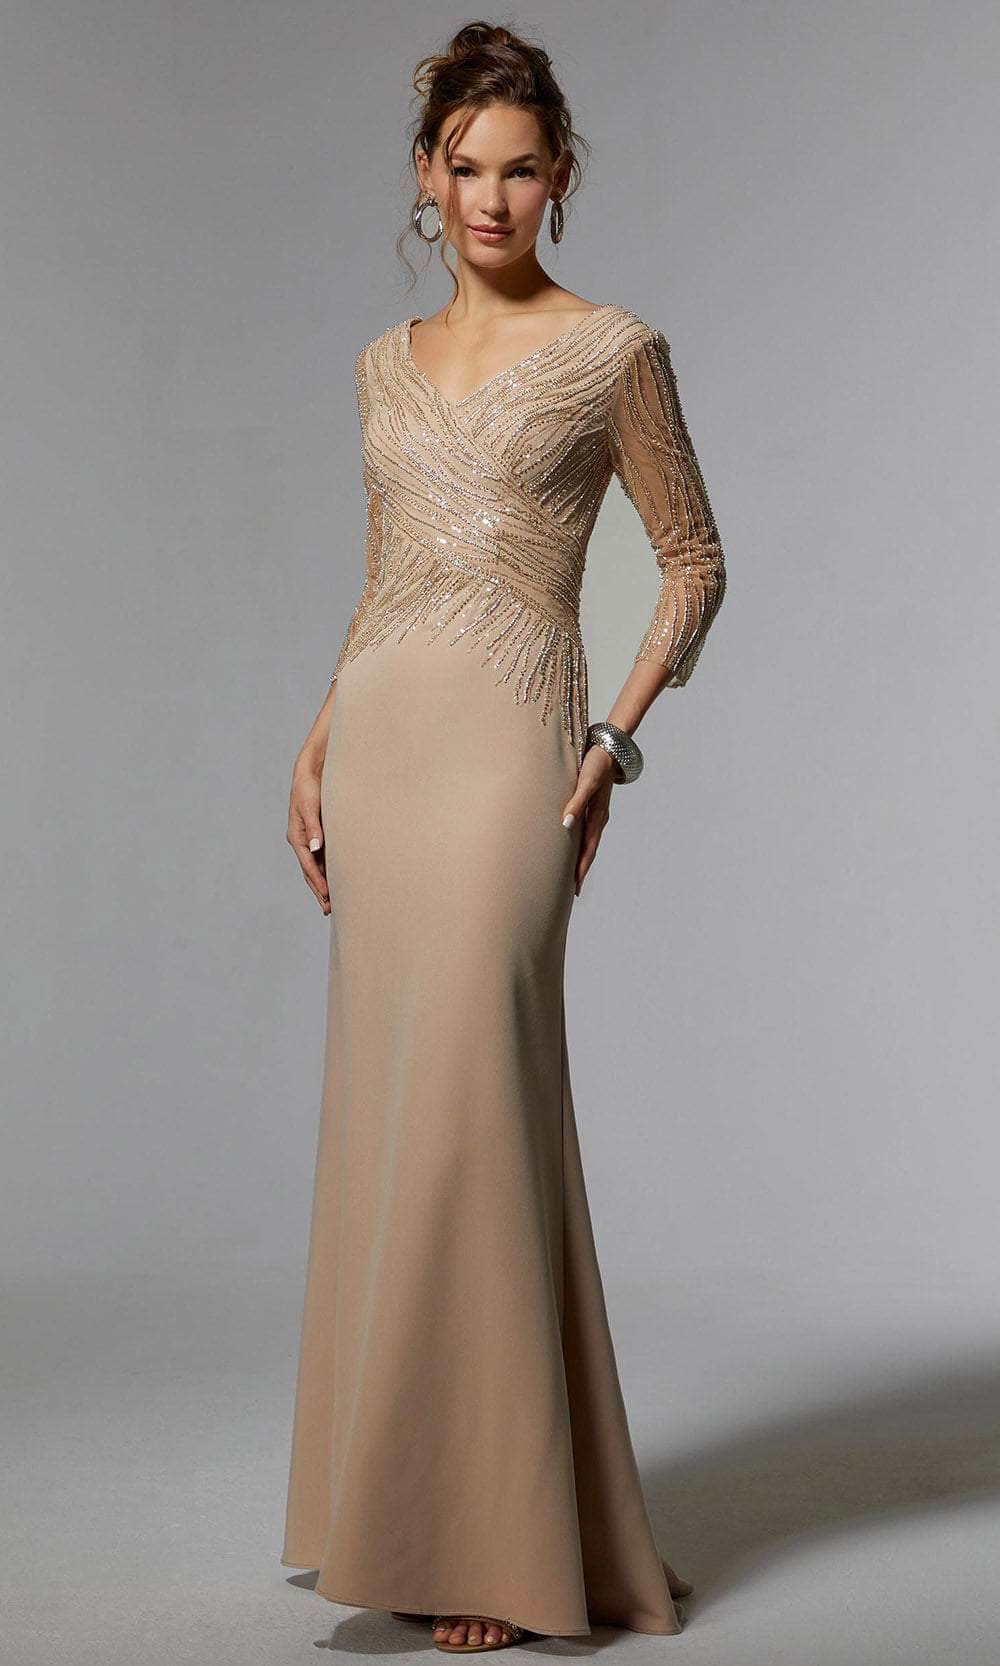 Image of MGNY By Mori Lee 72916 - Beaded V-Neck Evening Dress